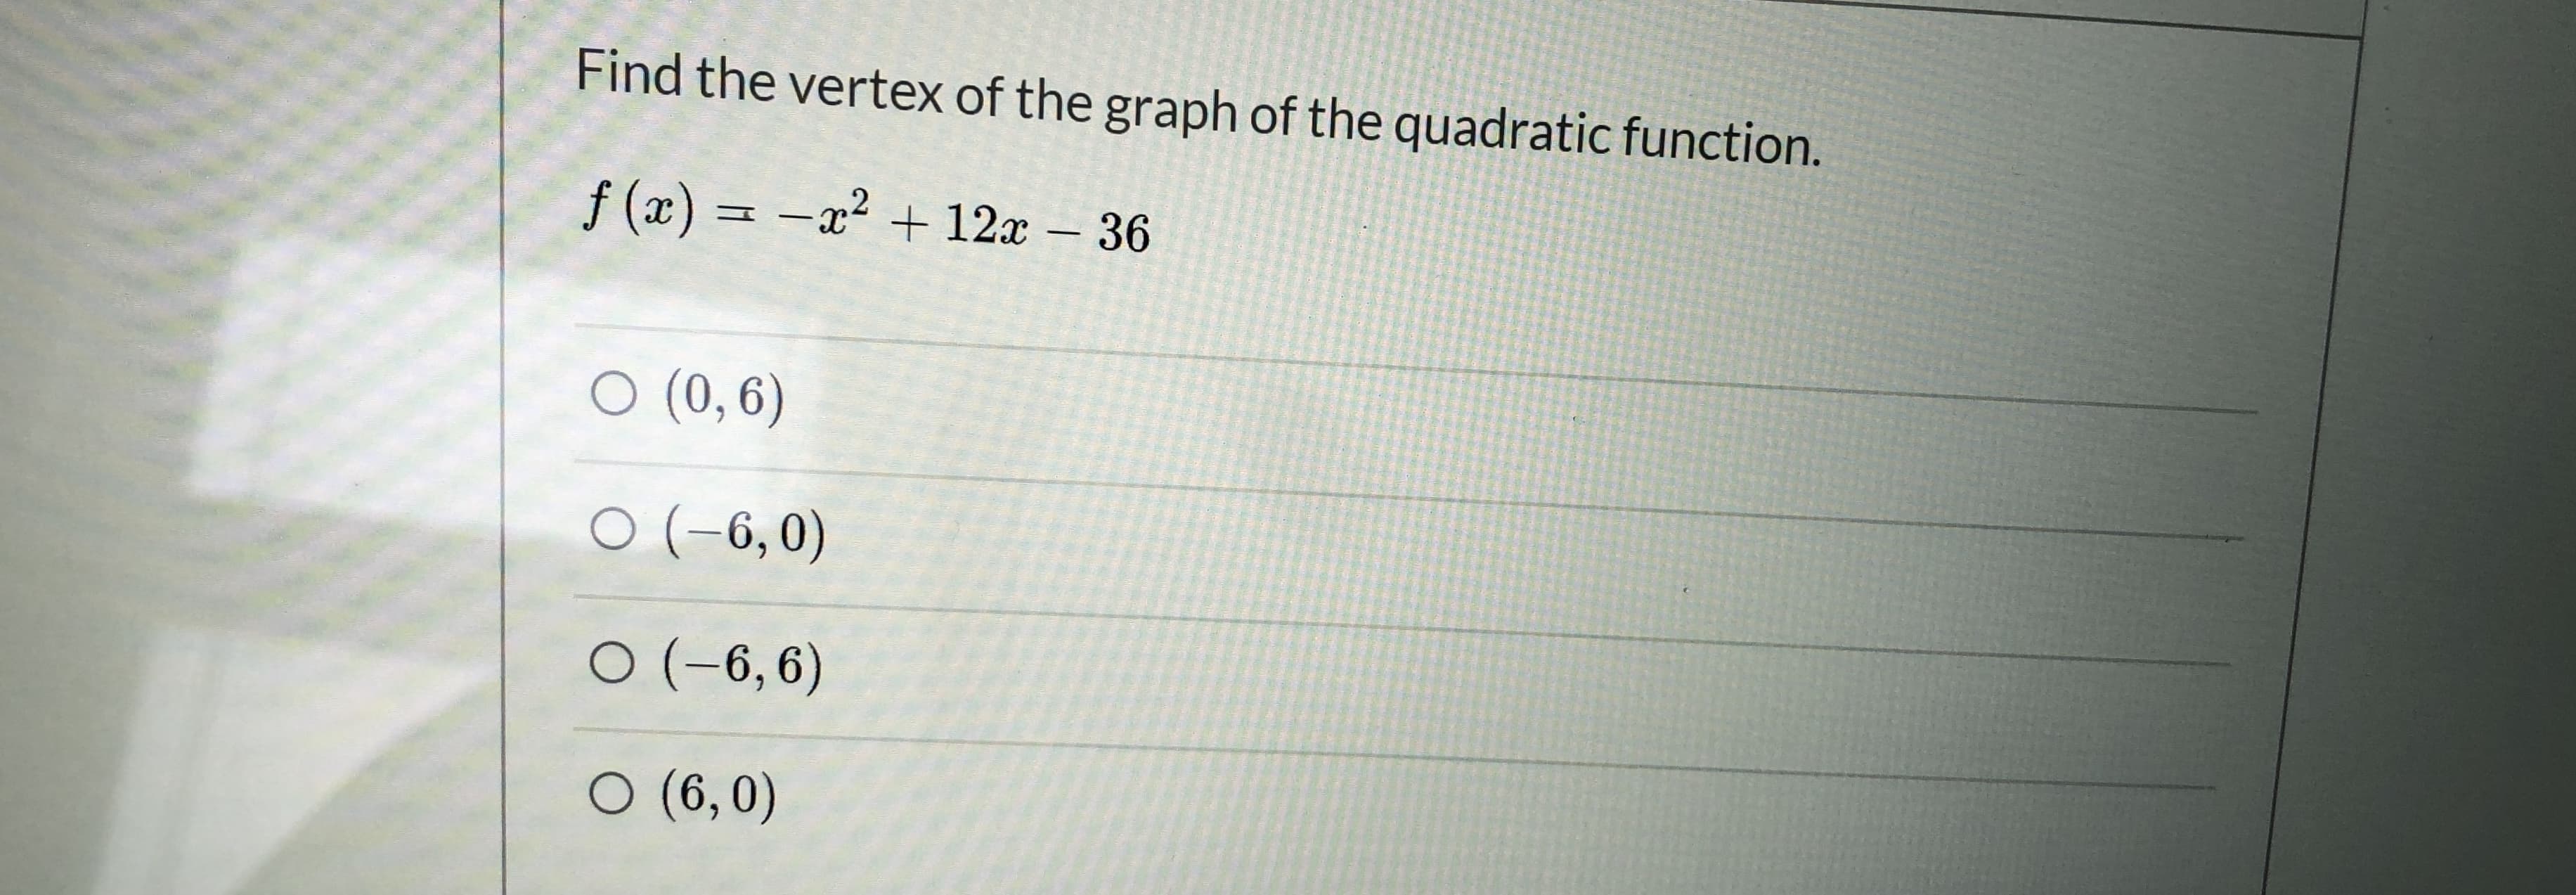 Find the vertex of the graph of the quadratic function.
f (x) = -x² + 12r – 36
O (0, 6)
O (-6,0)
O (-6,6)
O (6,0)
